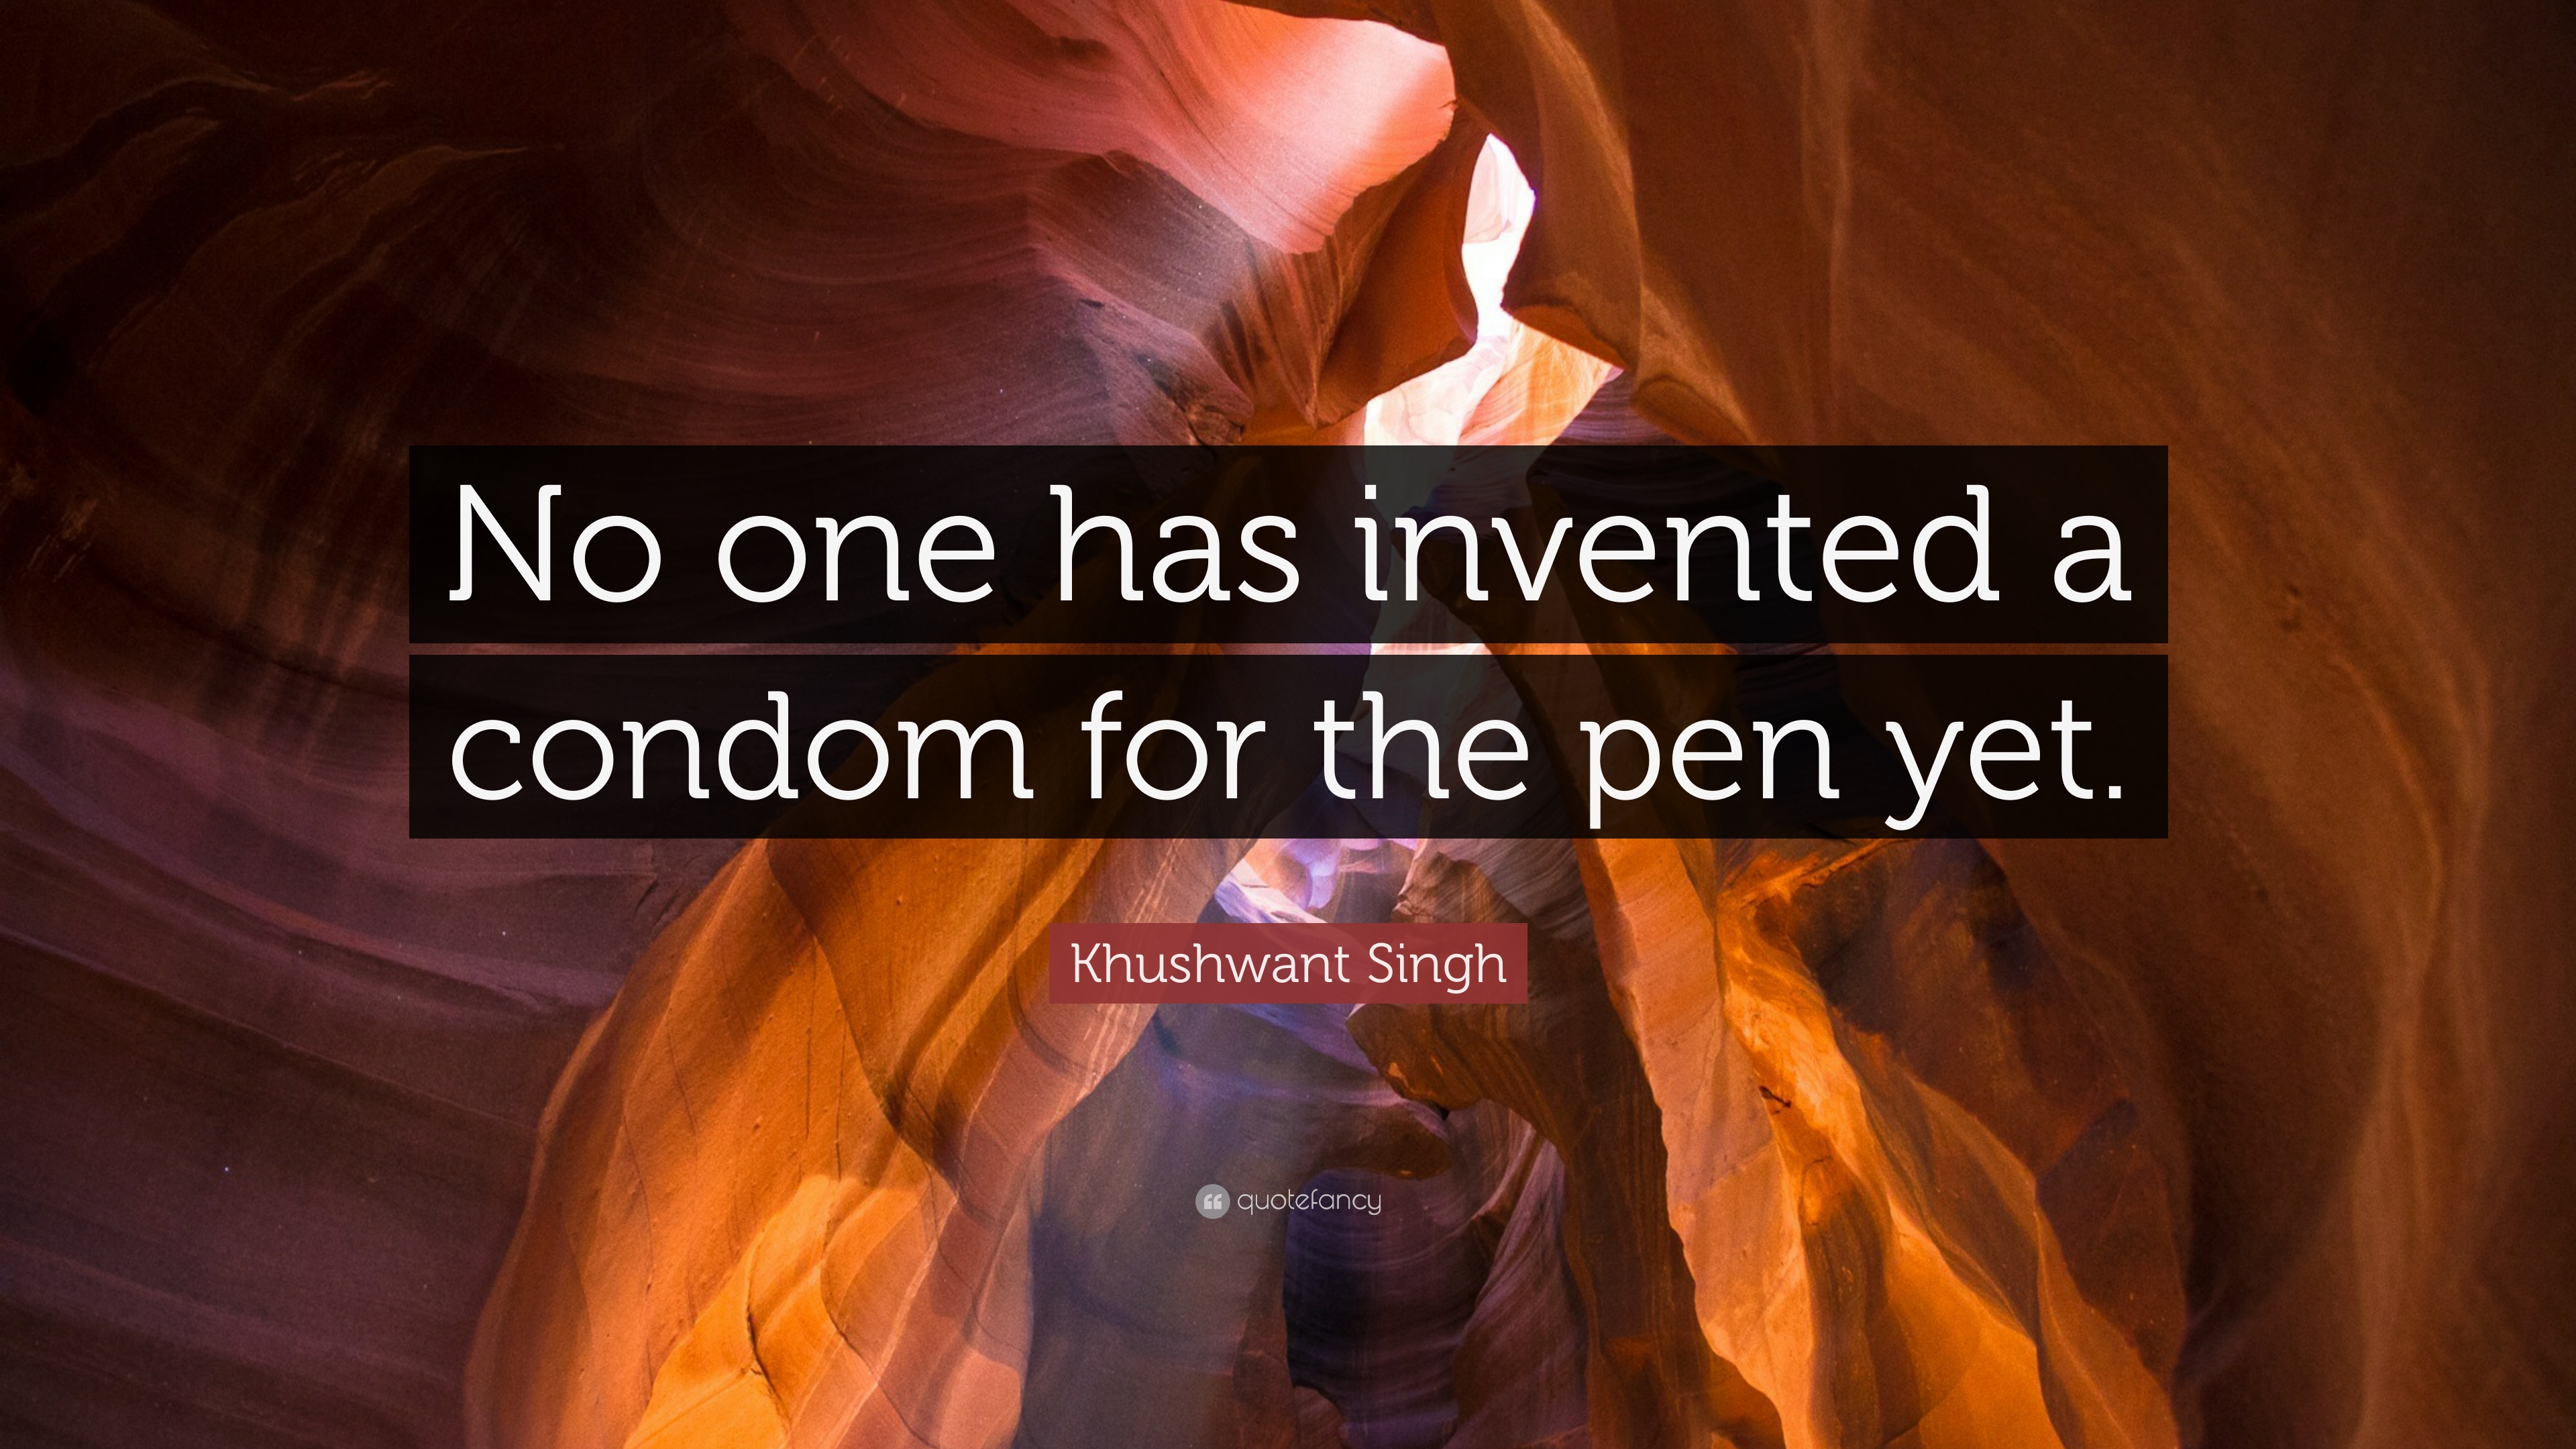 Khushwant Singh Quote: “No one has invented a condom for the pen yet